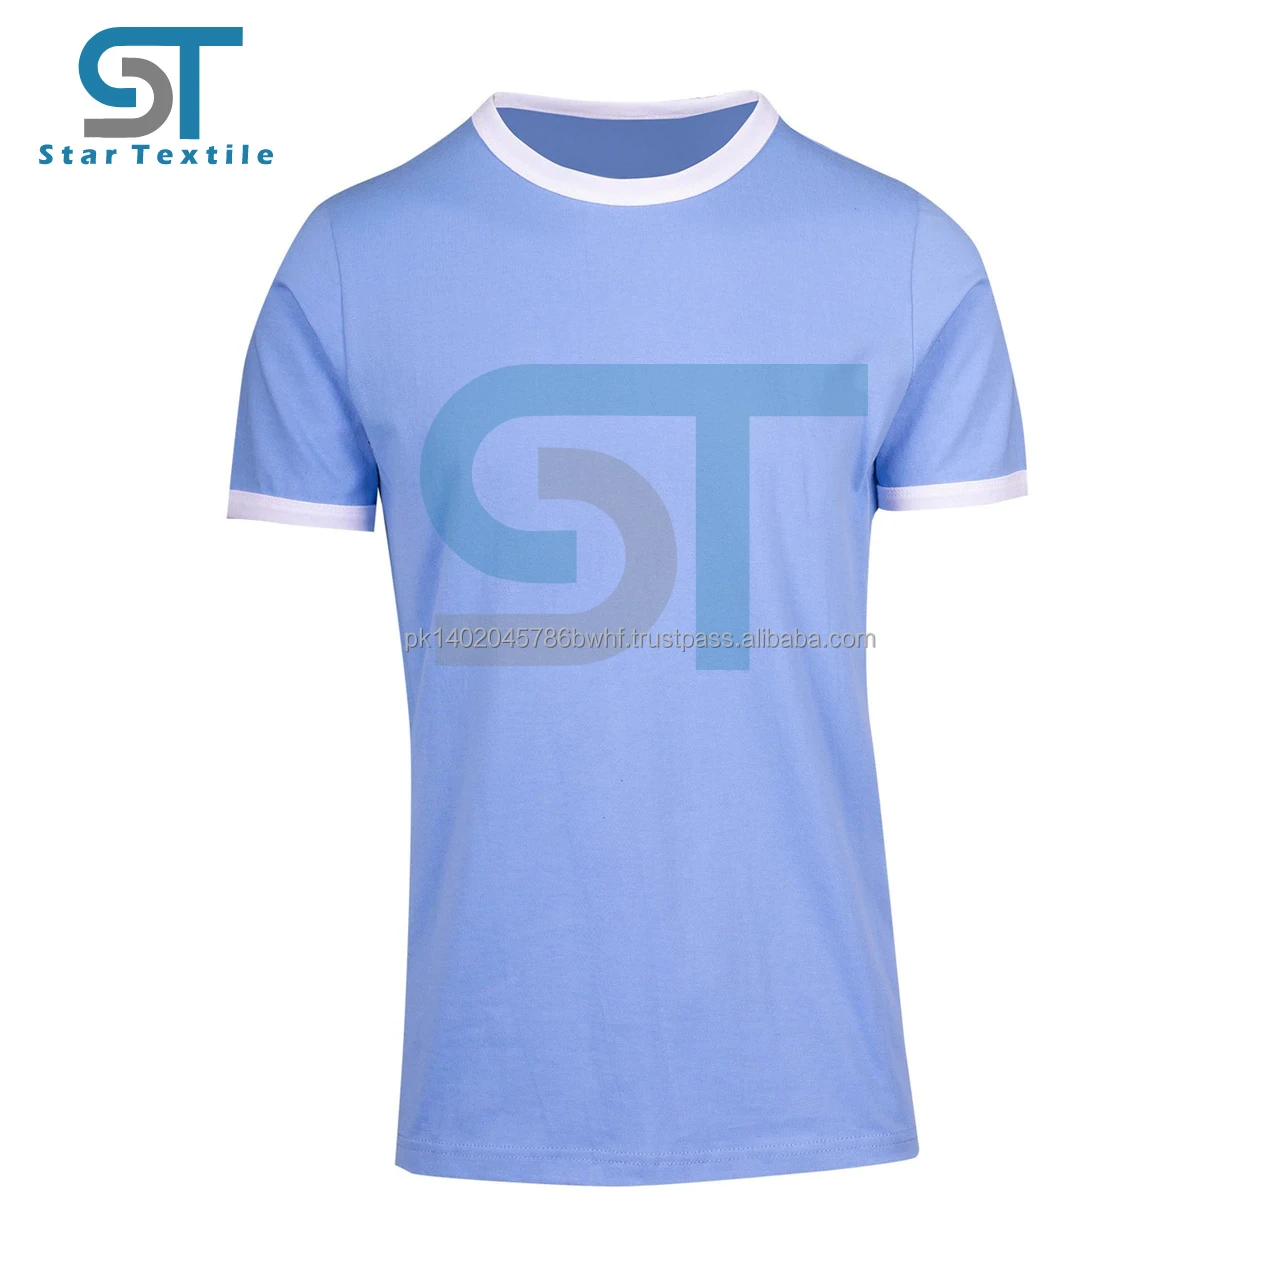 T-Shirts Slim Fit Retro Ringer-Style / 2021 100% cotton tubular style printing ringer t shirt / mens t-shirt ring style